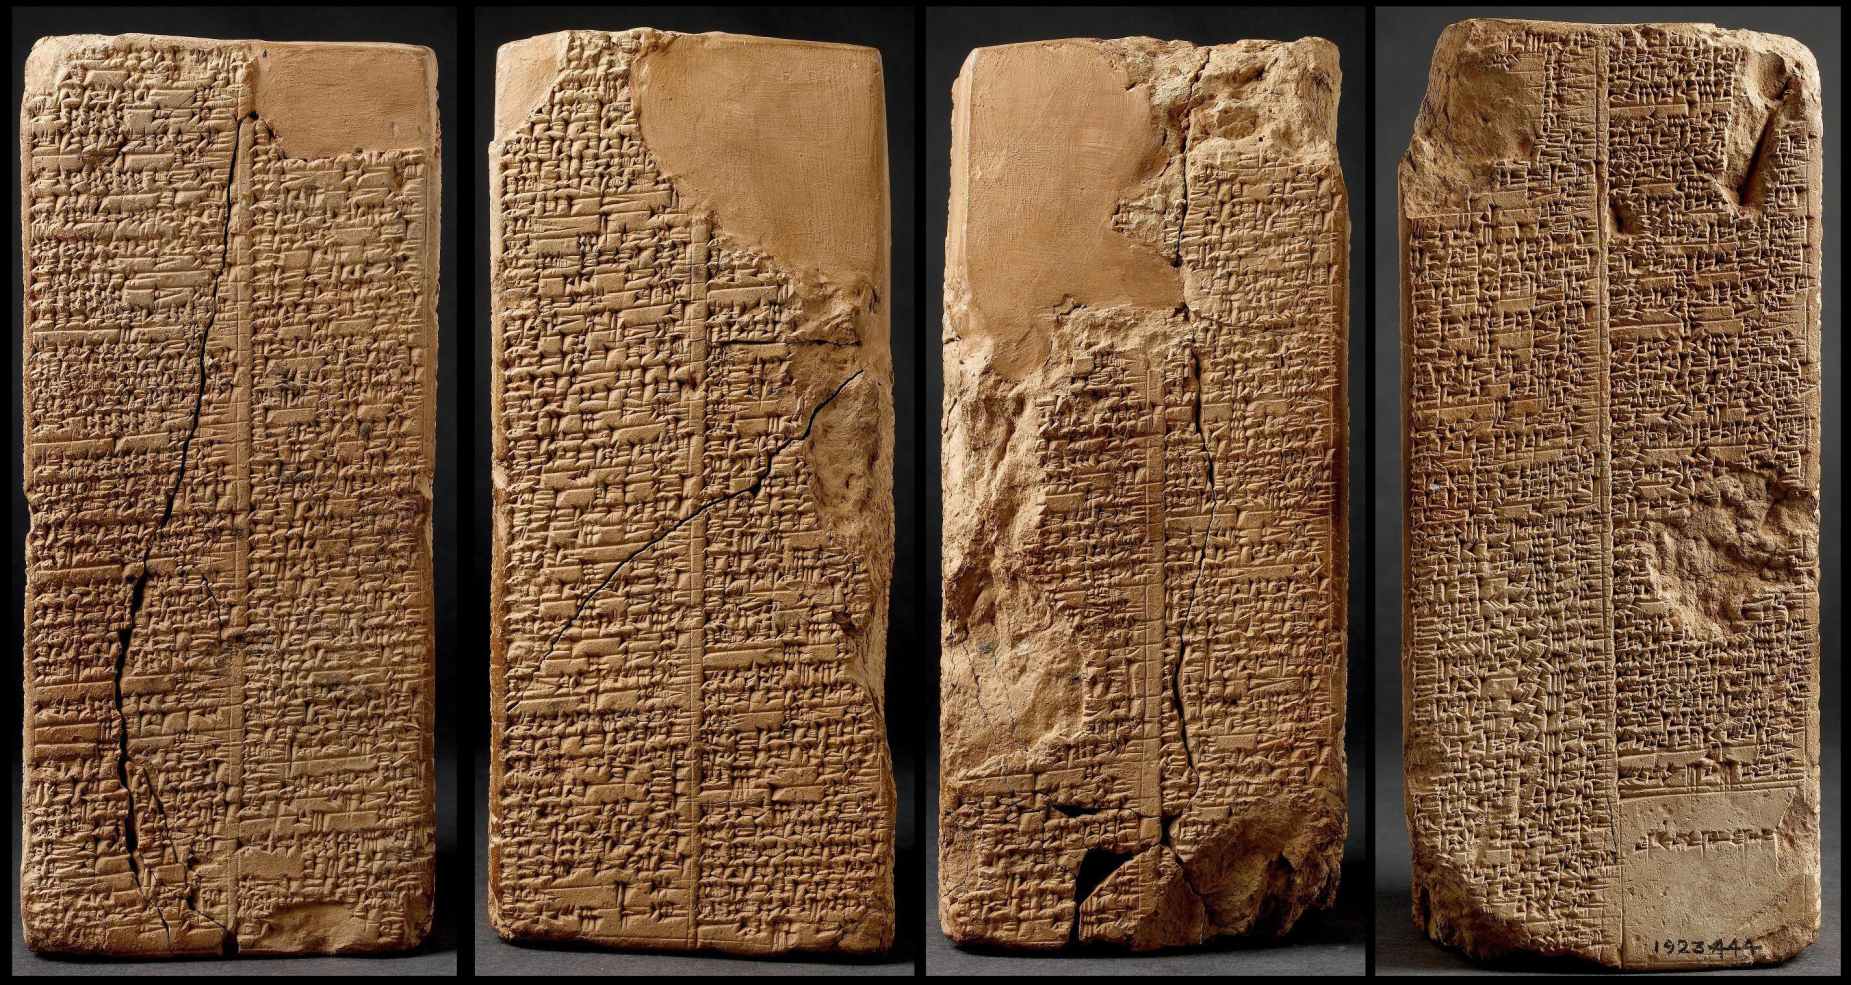 Sumerian King list, cuneiform script document listing Sumerian cities and they rulers. © Alamy | Valid from August 15, 2022